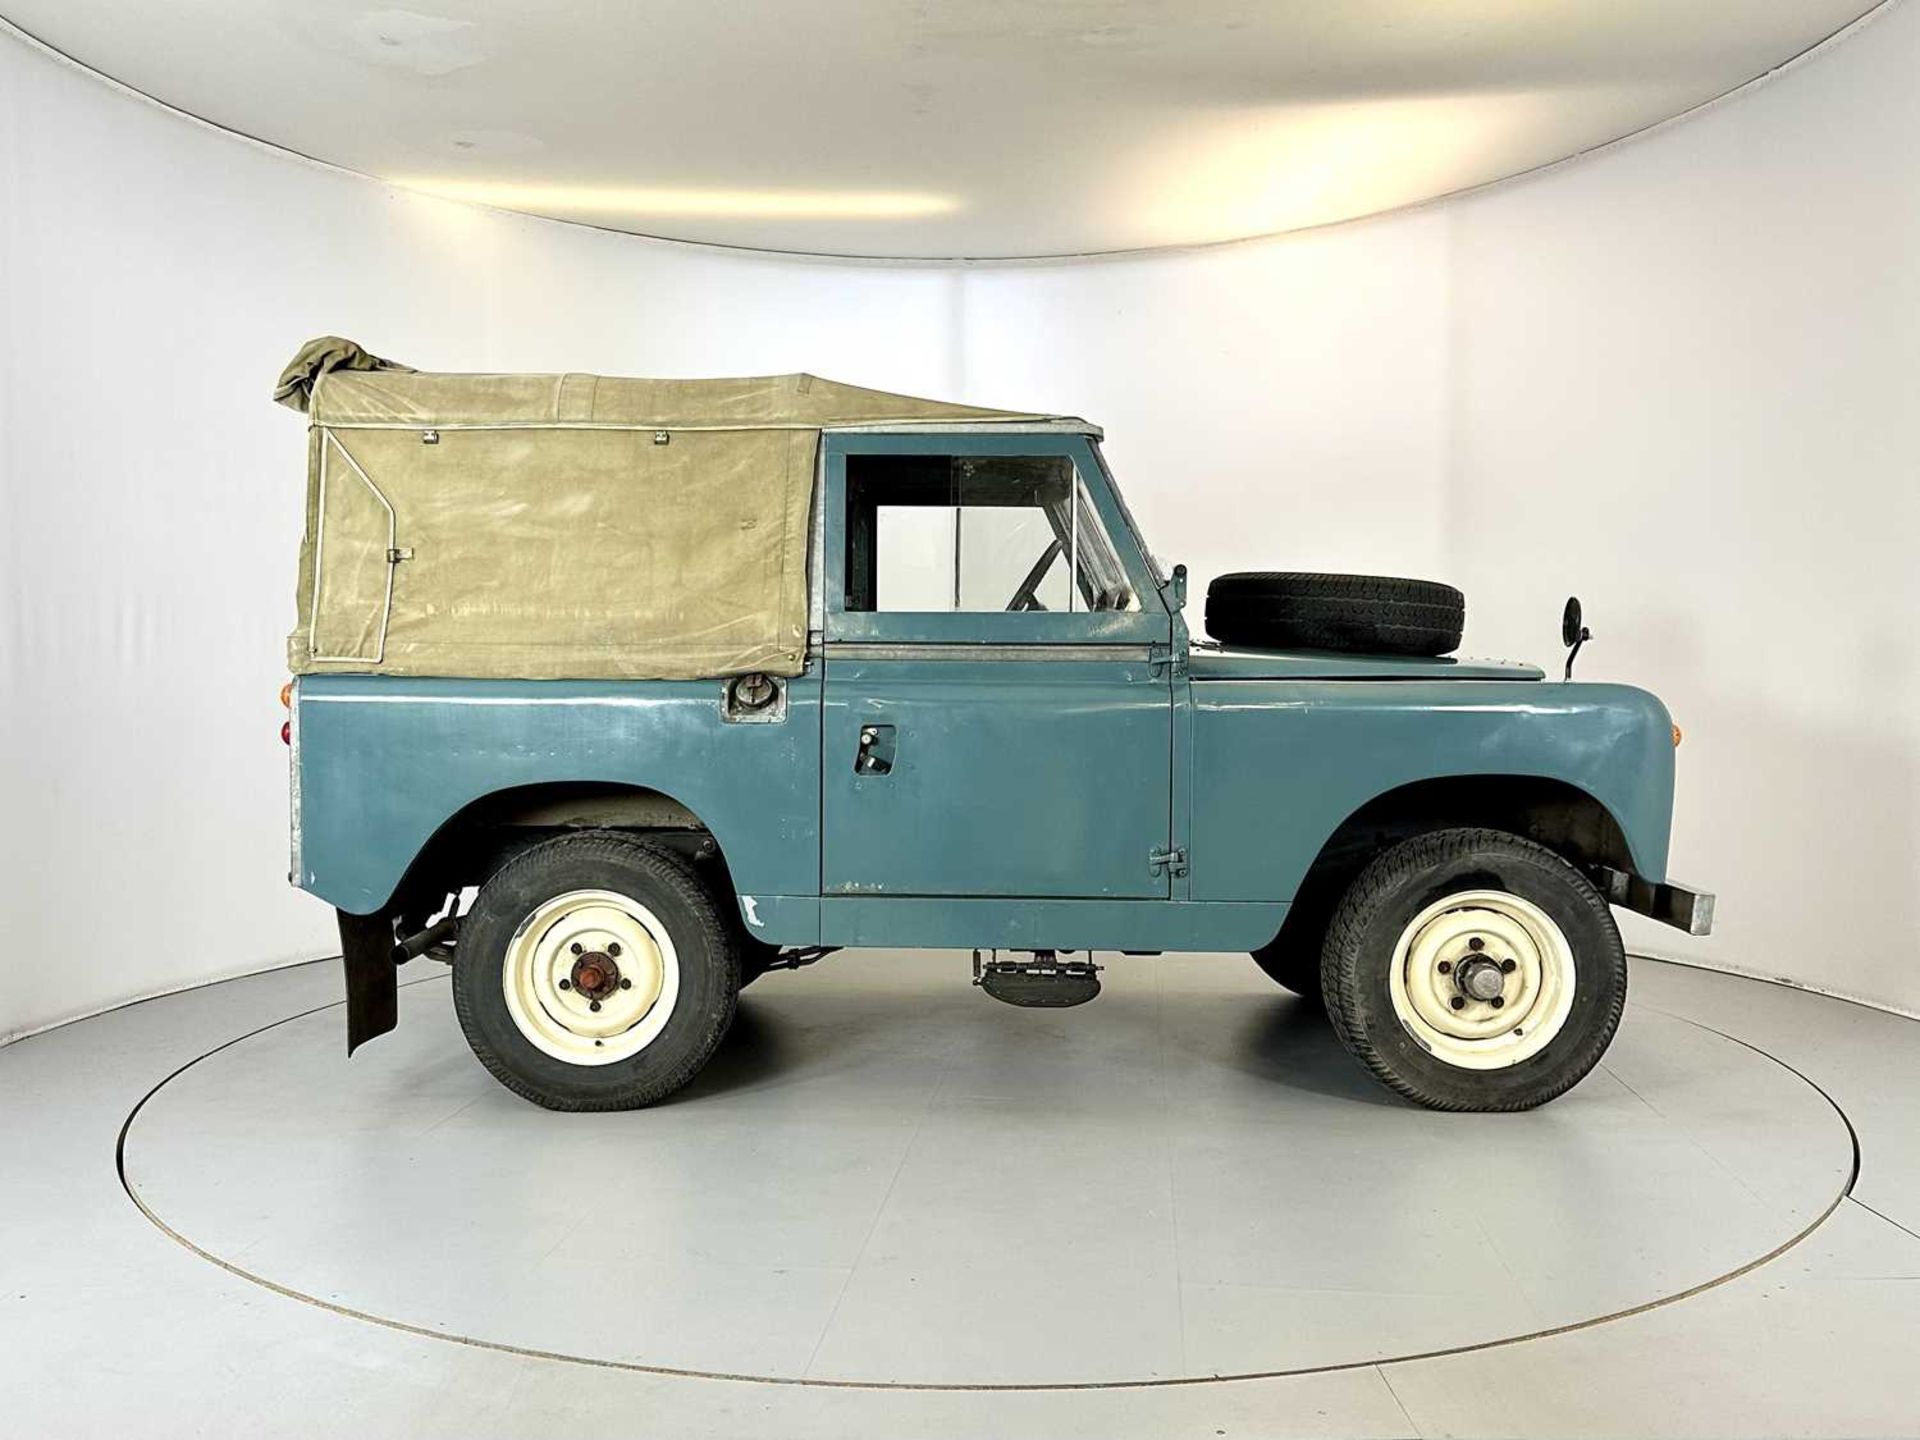 1969 Land Rover Series 2A Professional V6 engine conversion - Image 11 of 27